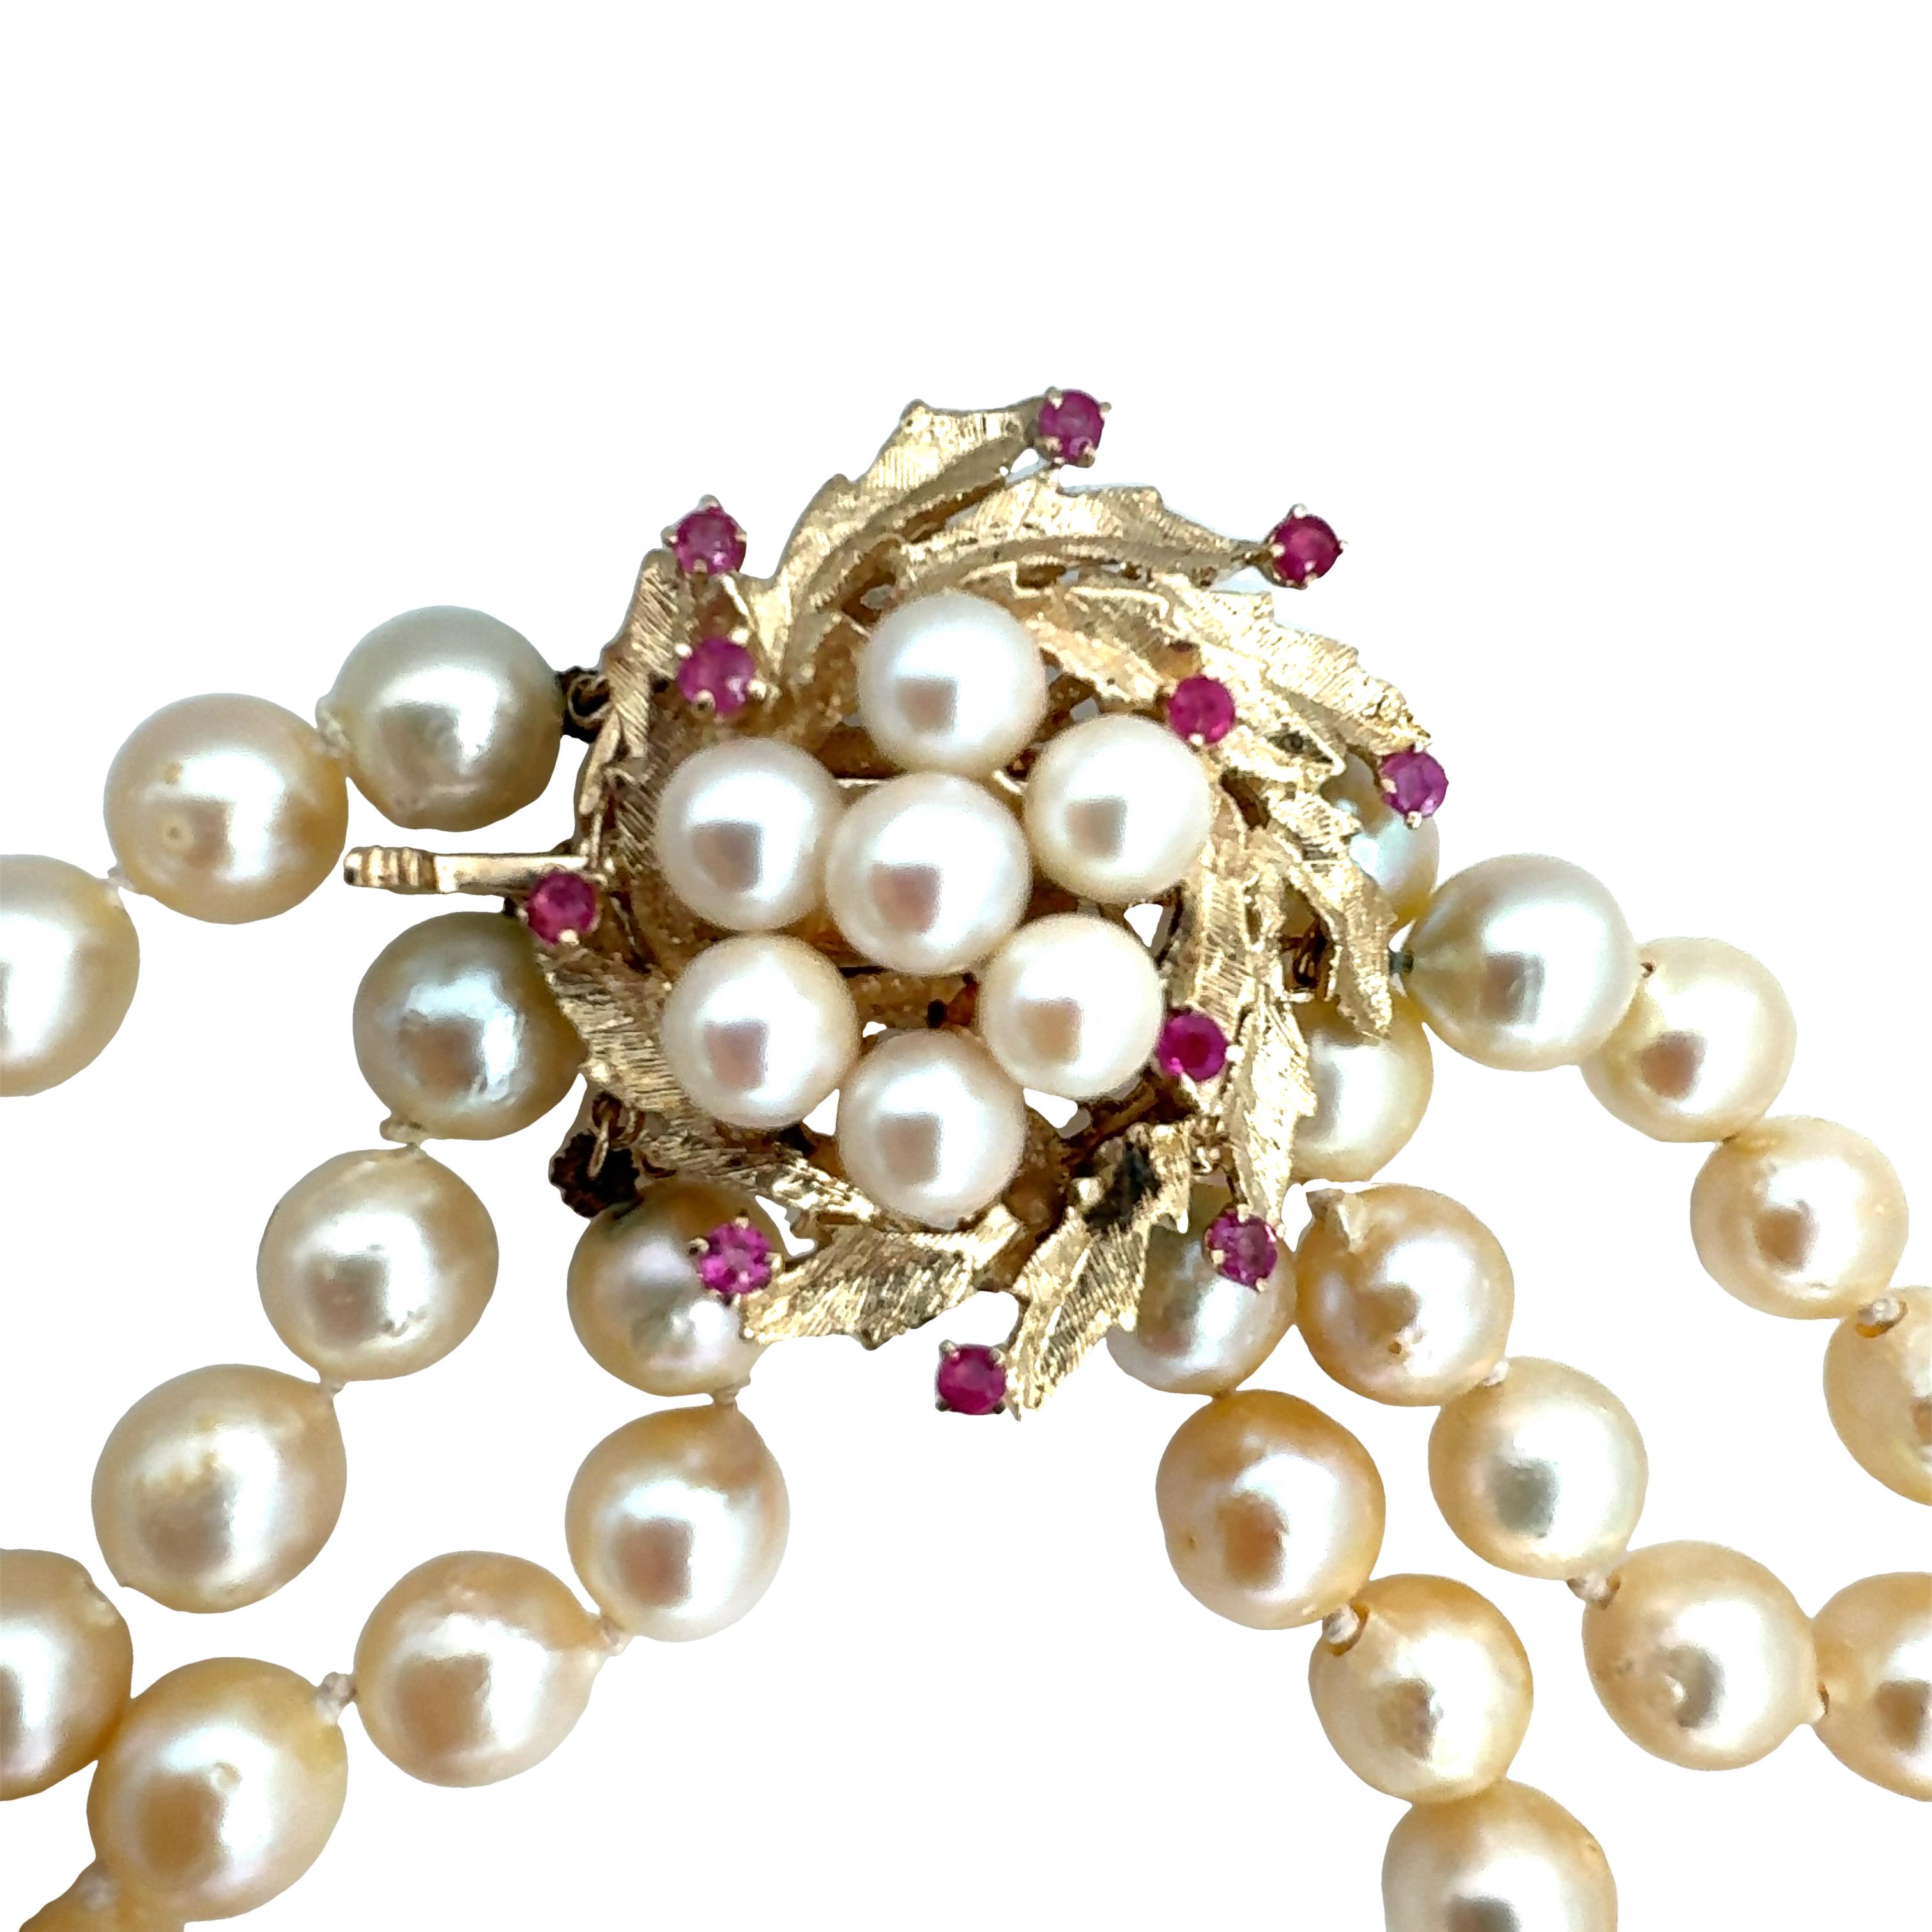 One triple-strand pearl necklace featuring 140 round, cream color cultured pearls measuring 8.00 millimeters in diameter on average. 14K yellow gold Florentine finish clasp with 11 prong set, round brilliant cut rubies weighing 0.44 ct. in